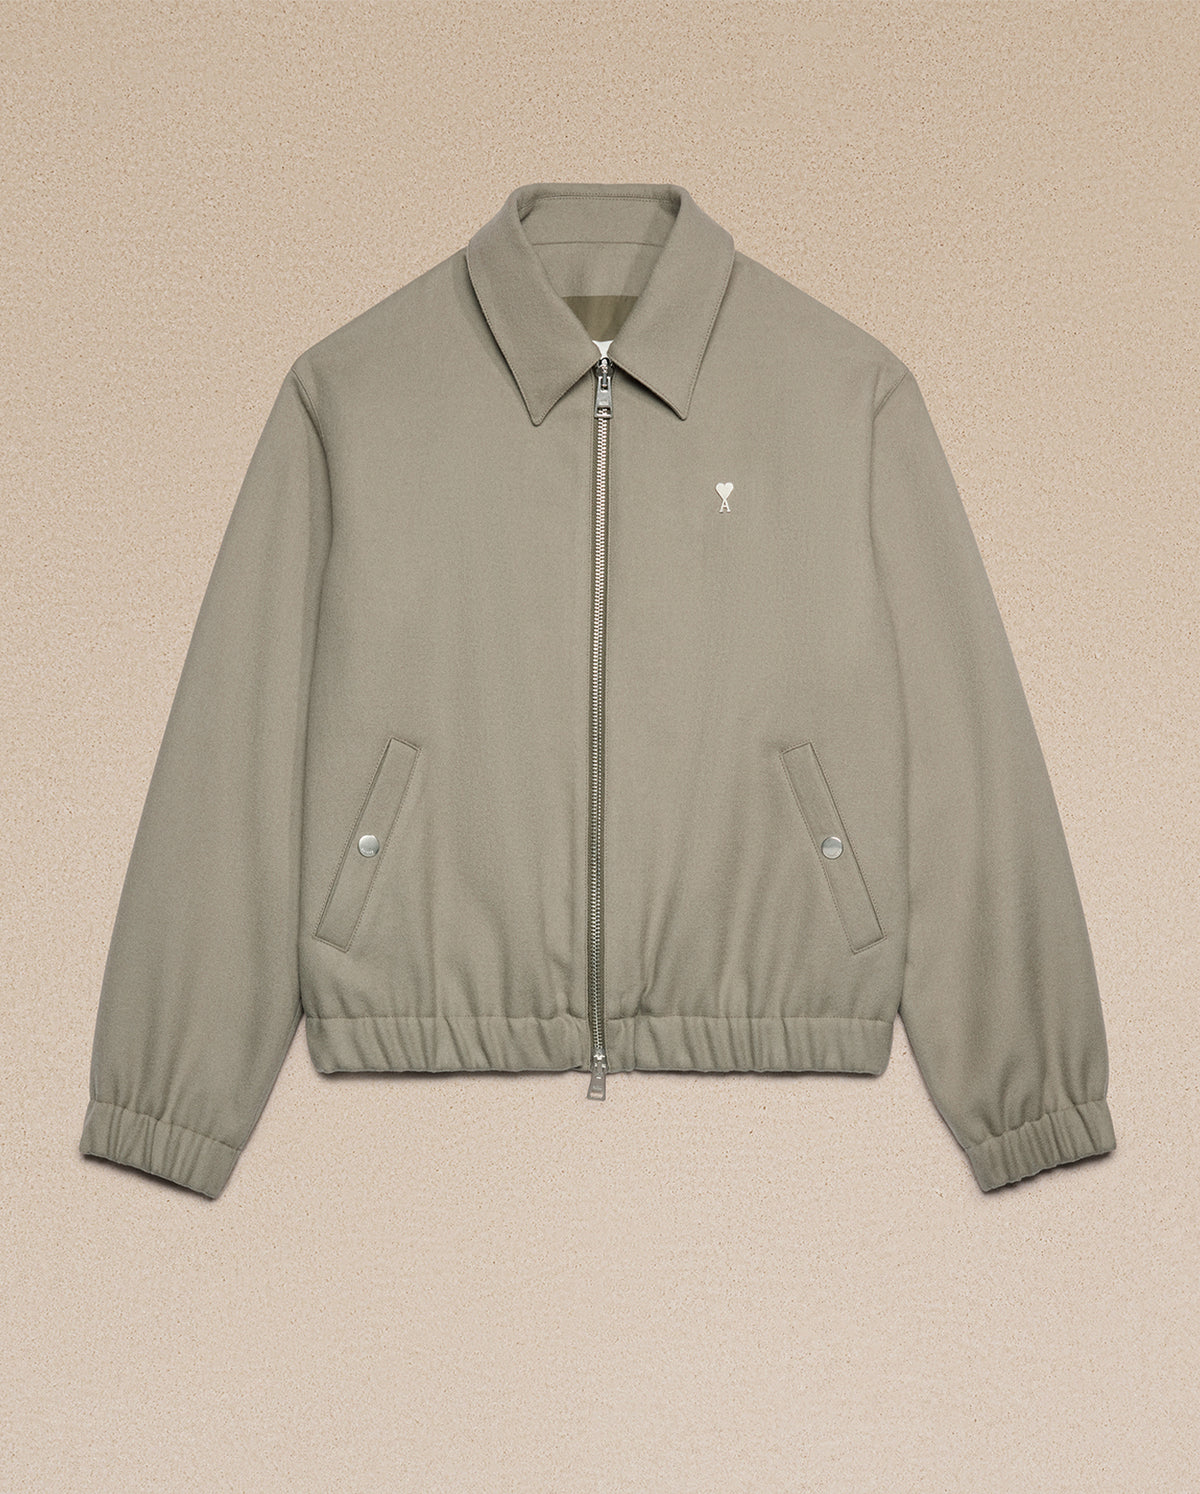 Adc Wool Zipped Jacket - Taupe